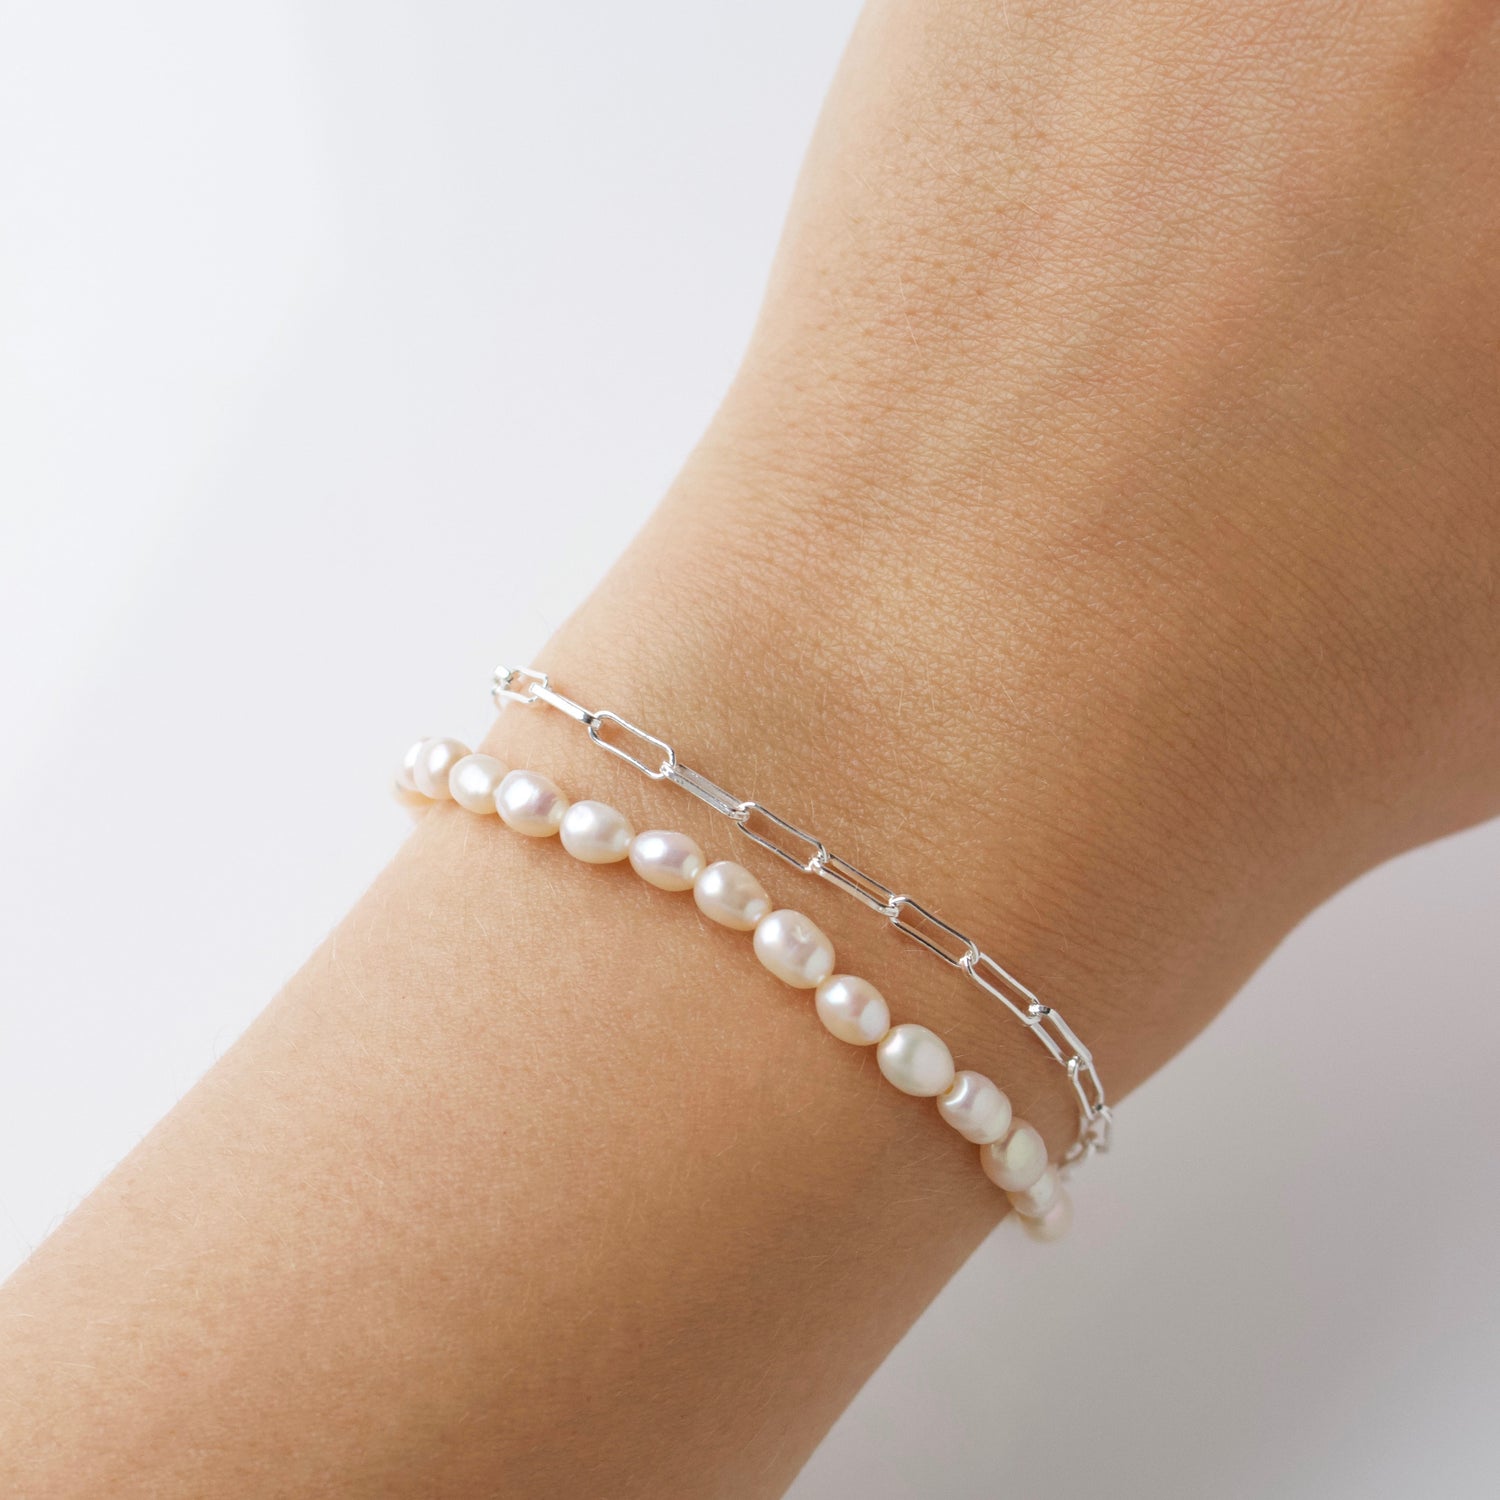 zoe sugg intentions lucky pearl and chain bracelet in silver